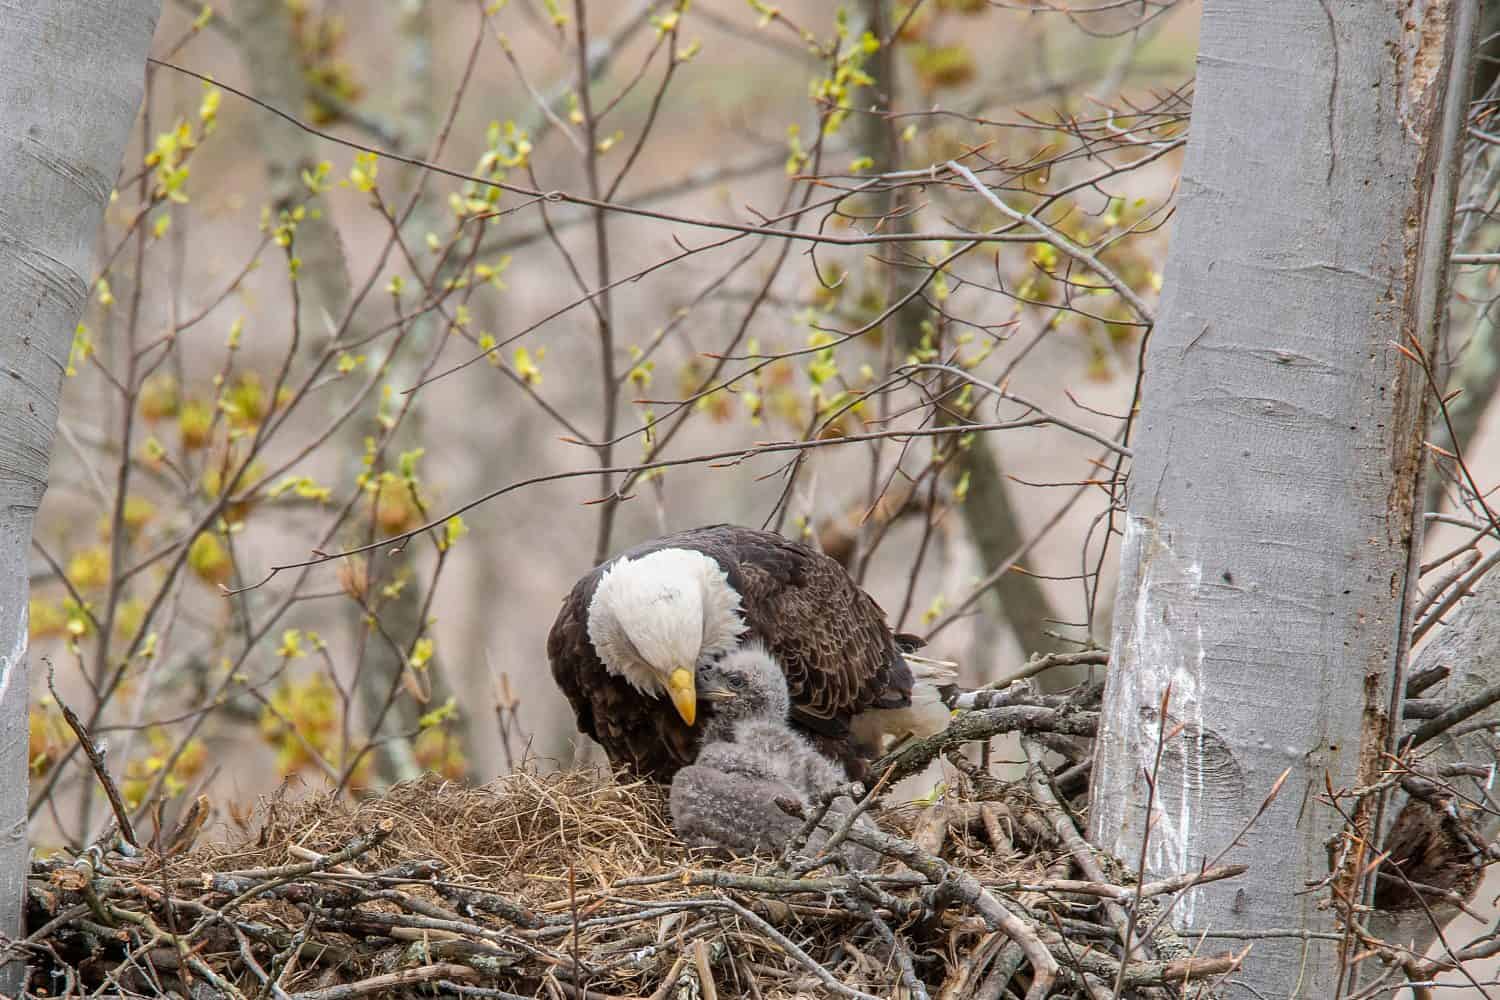 A close view of a bald eagle adult comforting the eaglet, high up in the nest.